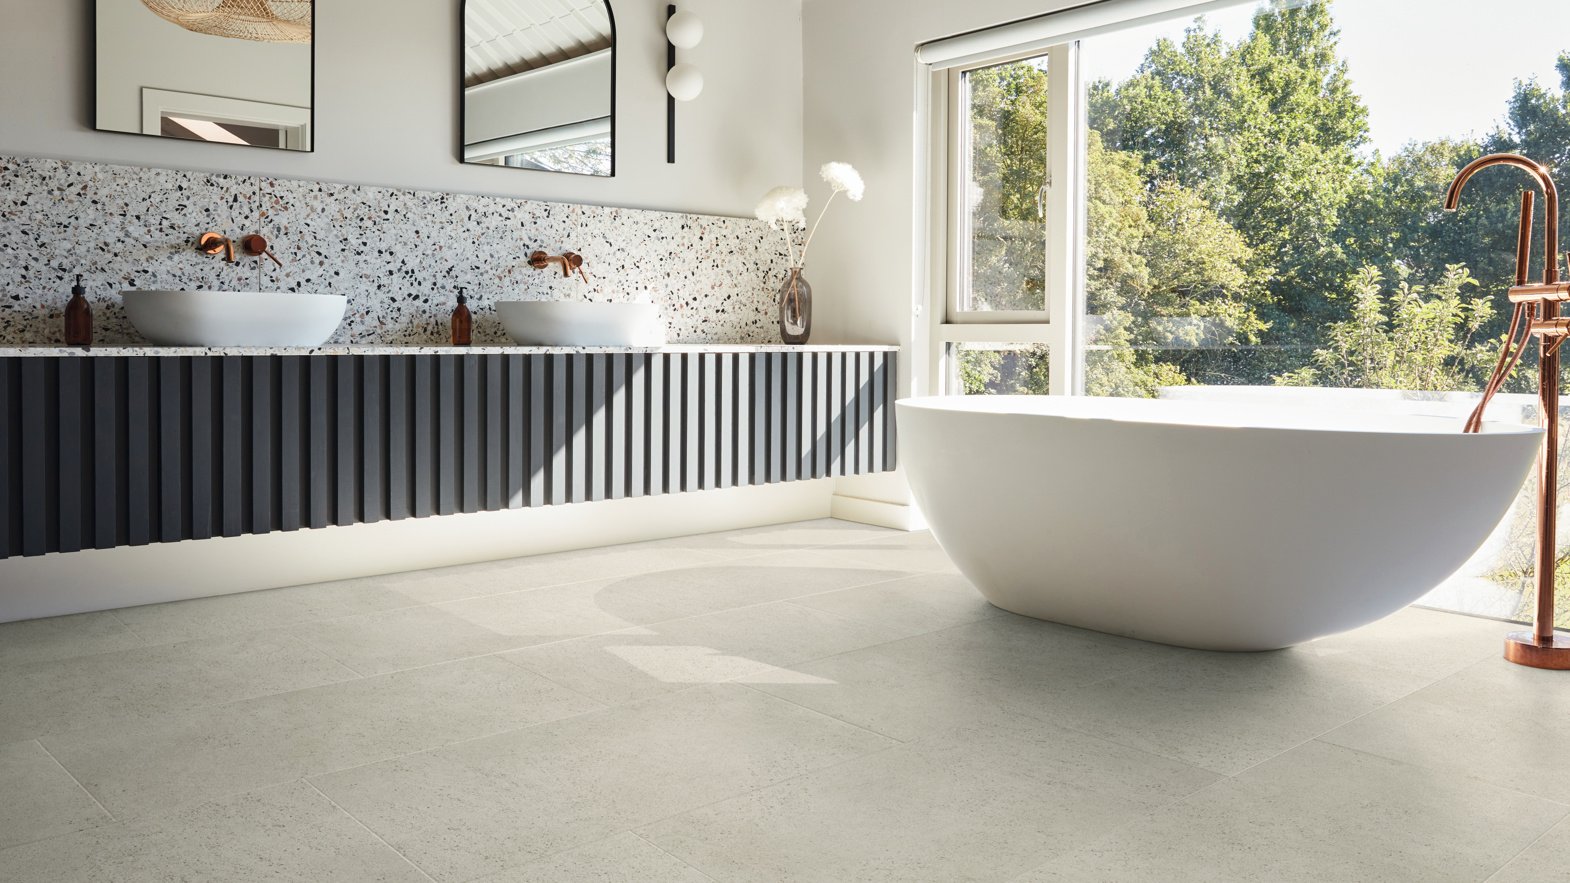 Caliza Classico LM39 | AKT-LM39 lvt floors in an open and airy bathroom